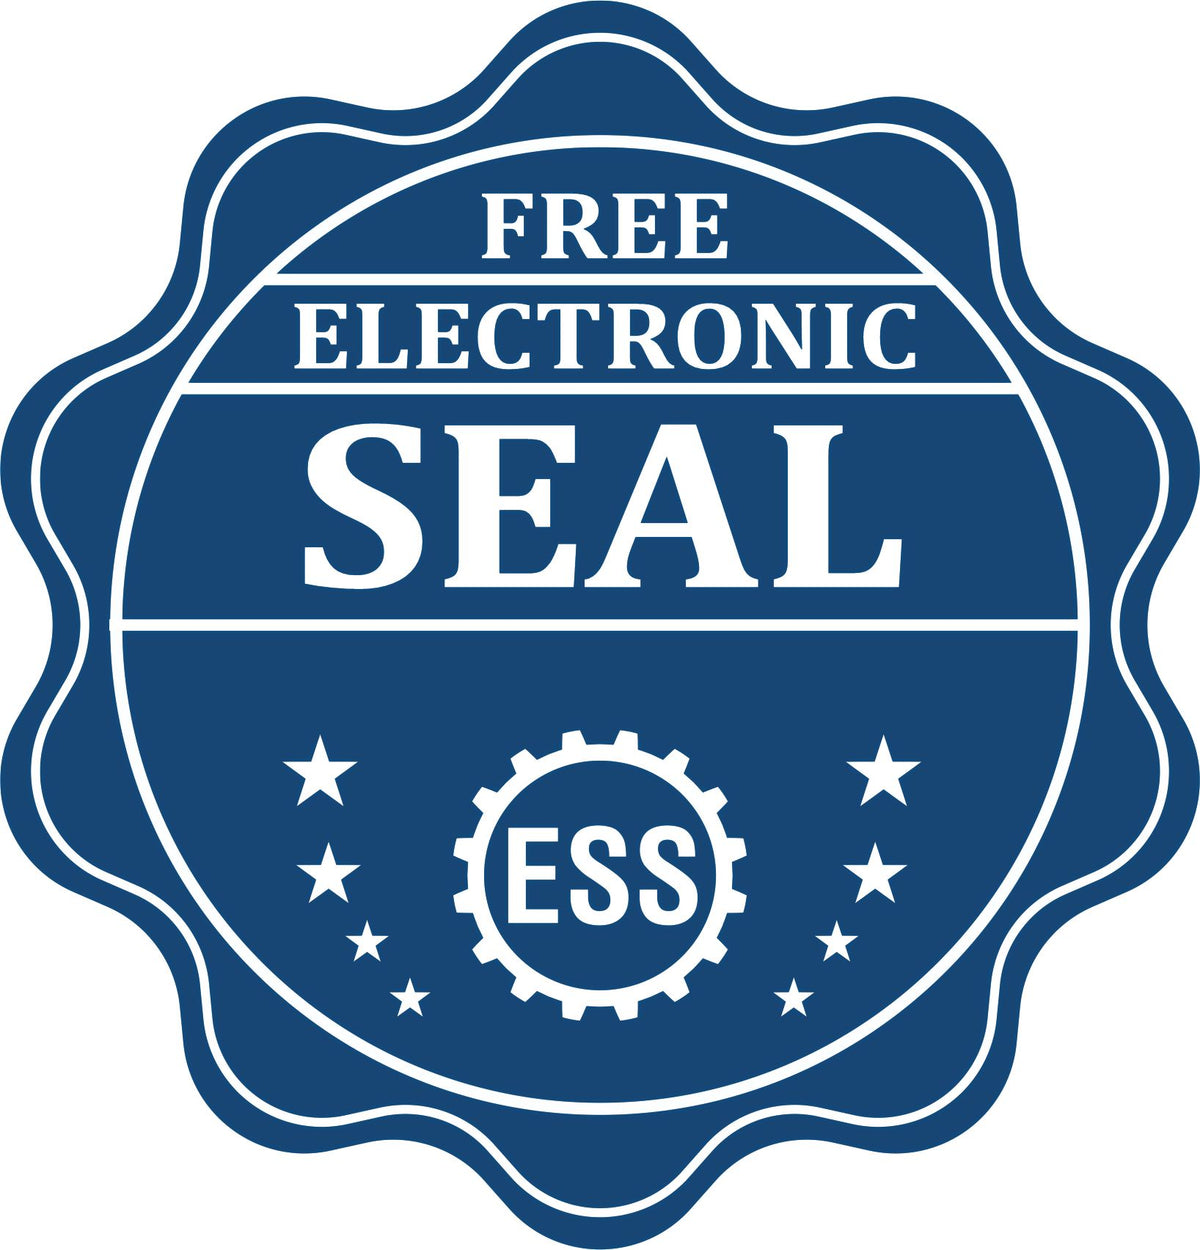 A badge showing a free electronic seal for the Extended Long Reach Alaska Surveyor Embosser with stars and the ESS gear on the emblem.